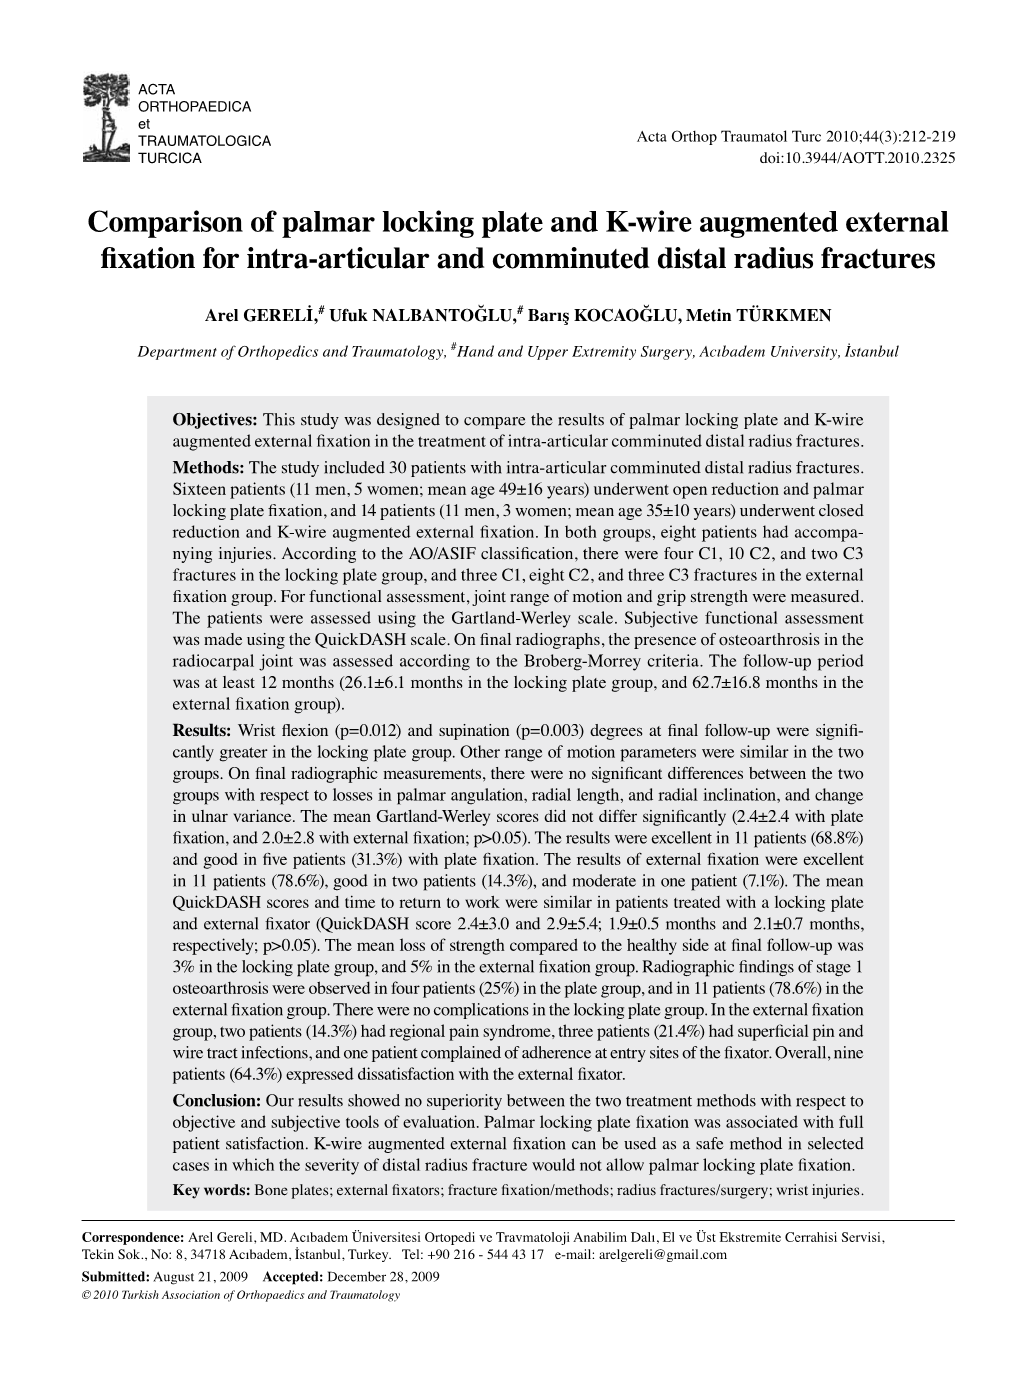 Comparison of Palmar Locking Plate and K-Wire Augmented External Fixation for Intra-Articular and Comminuted Distal Radius Fractures